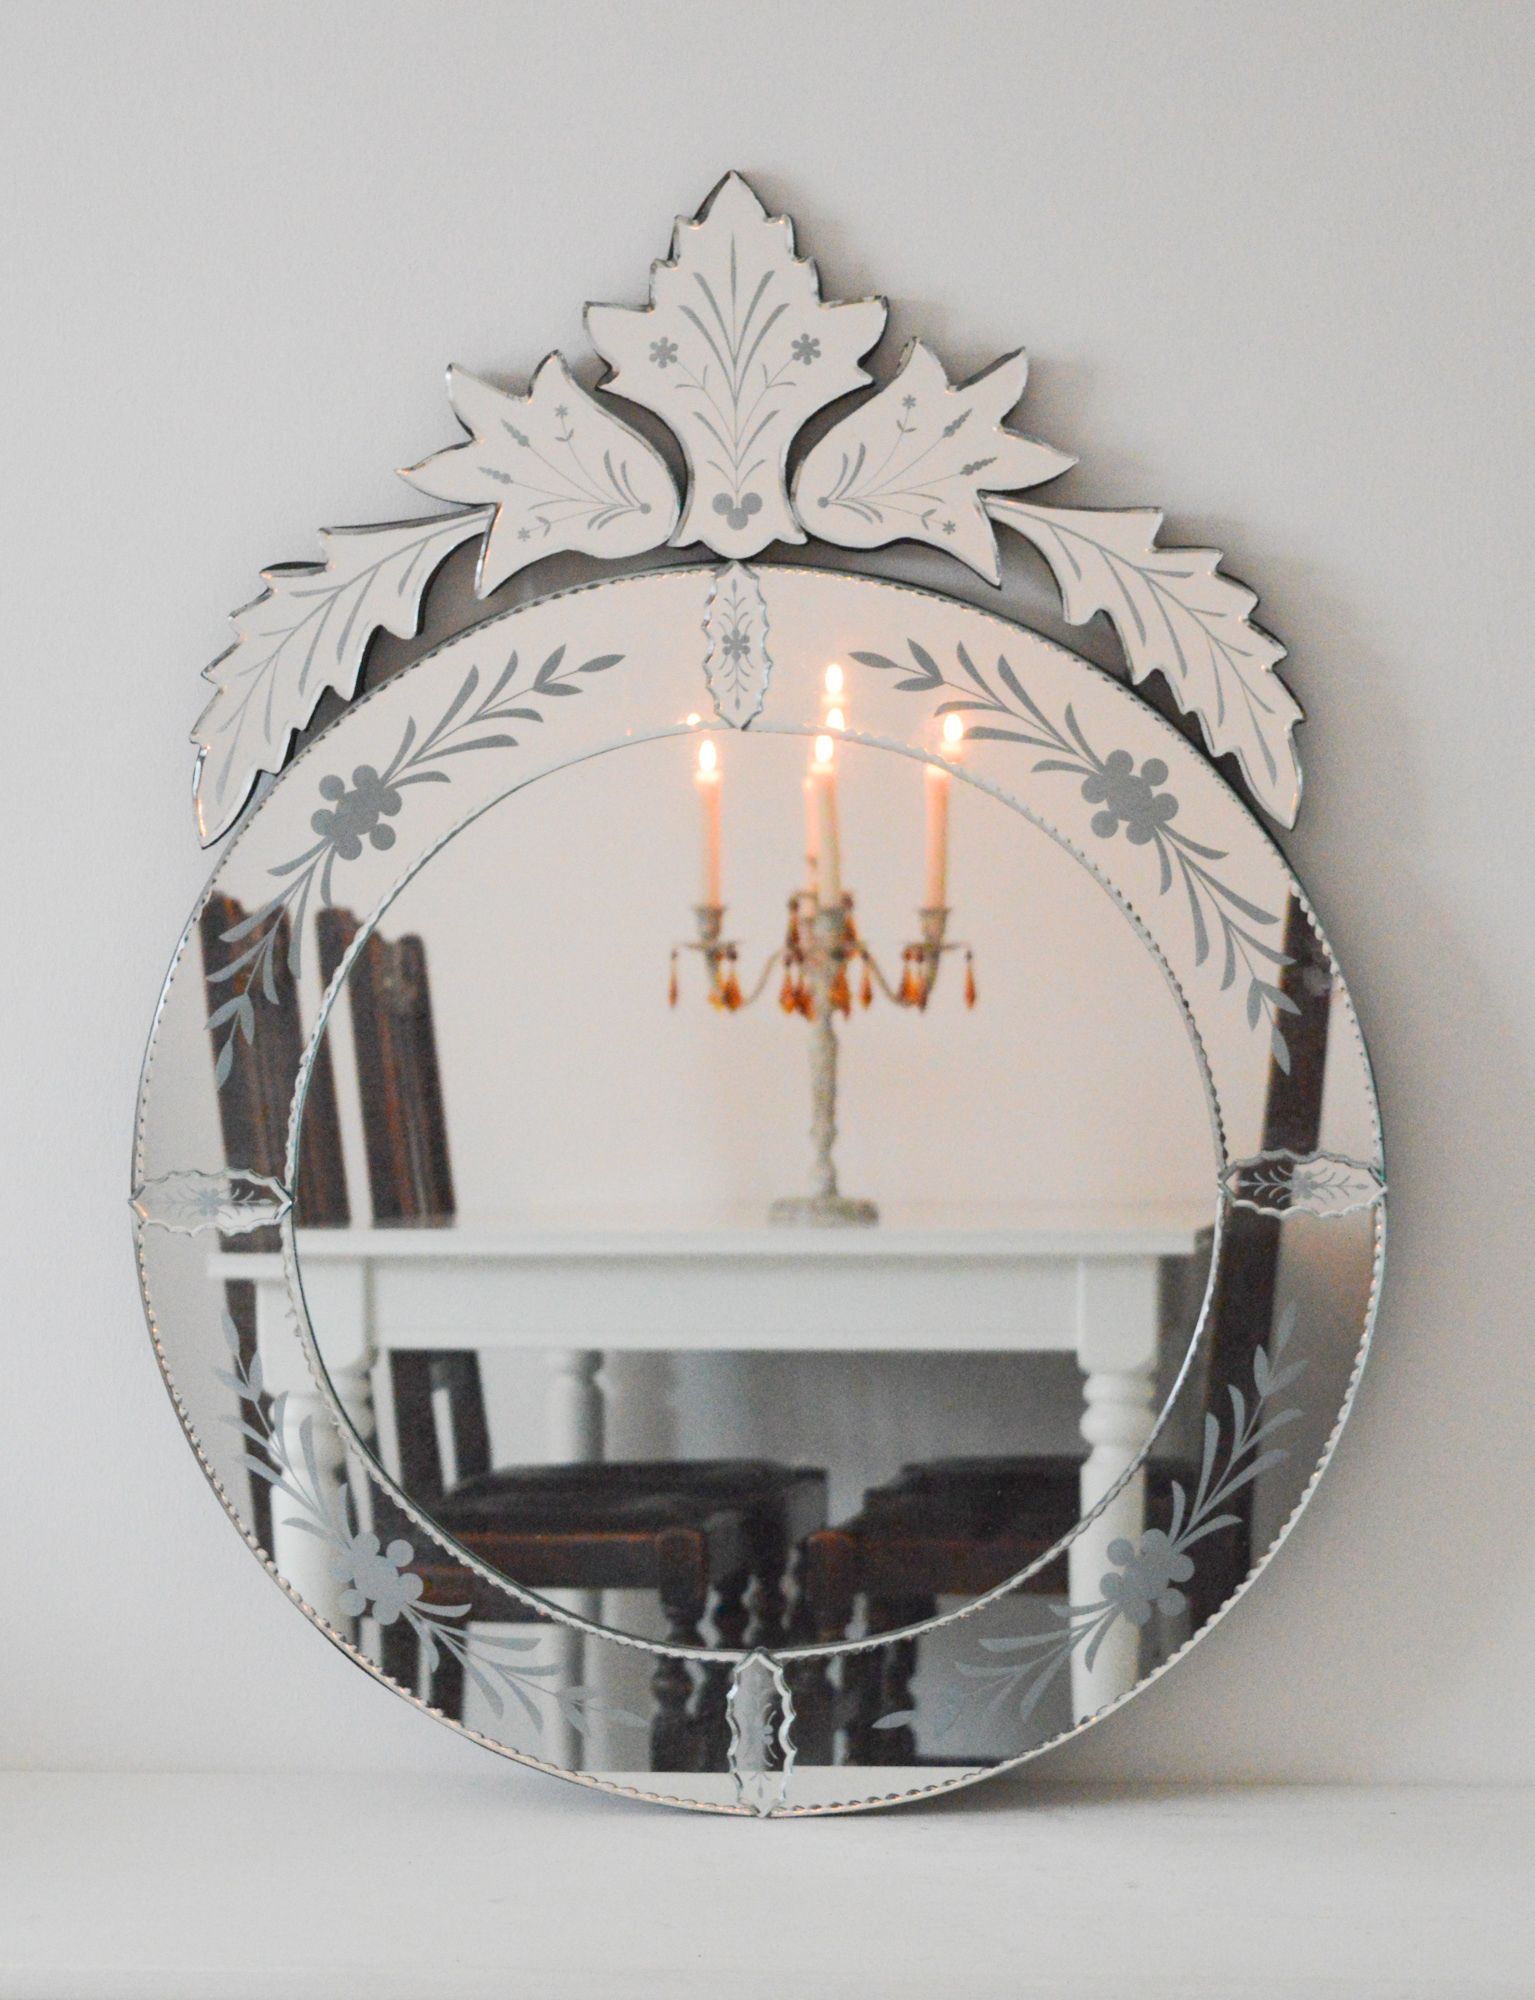 Vintage Venetian Style Wall Mirror, Large Round Decorative Mirror Throughout Tellier Accent Wall Mirrors (View 6 of 15)